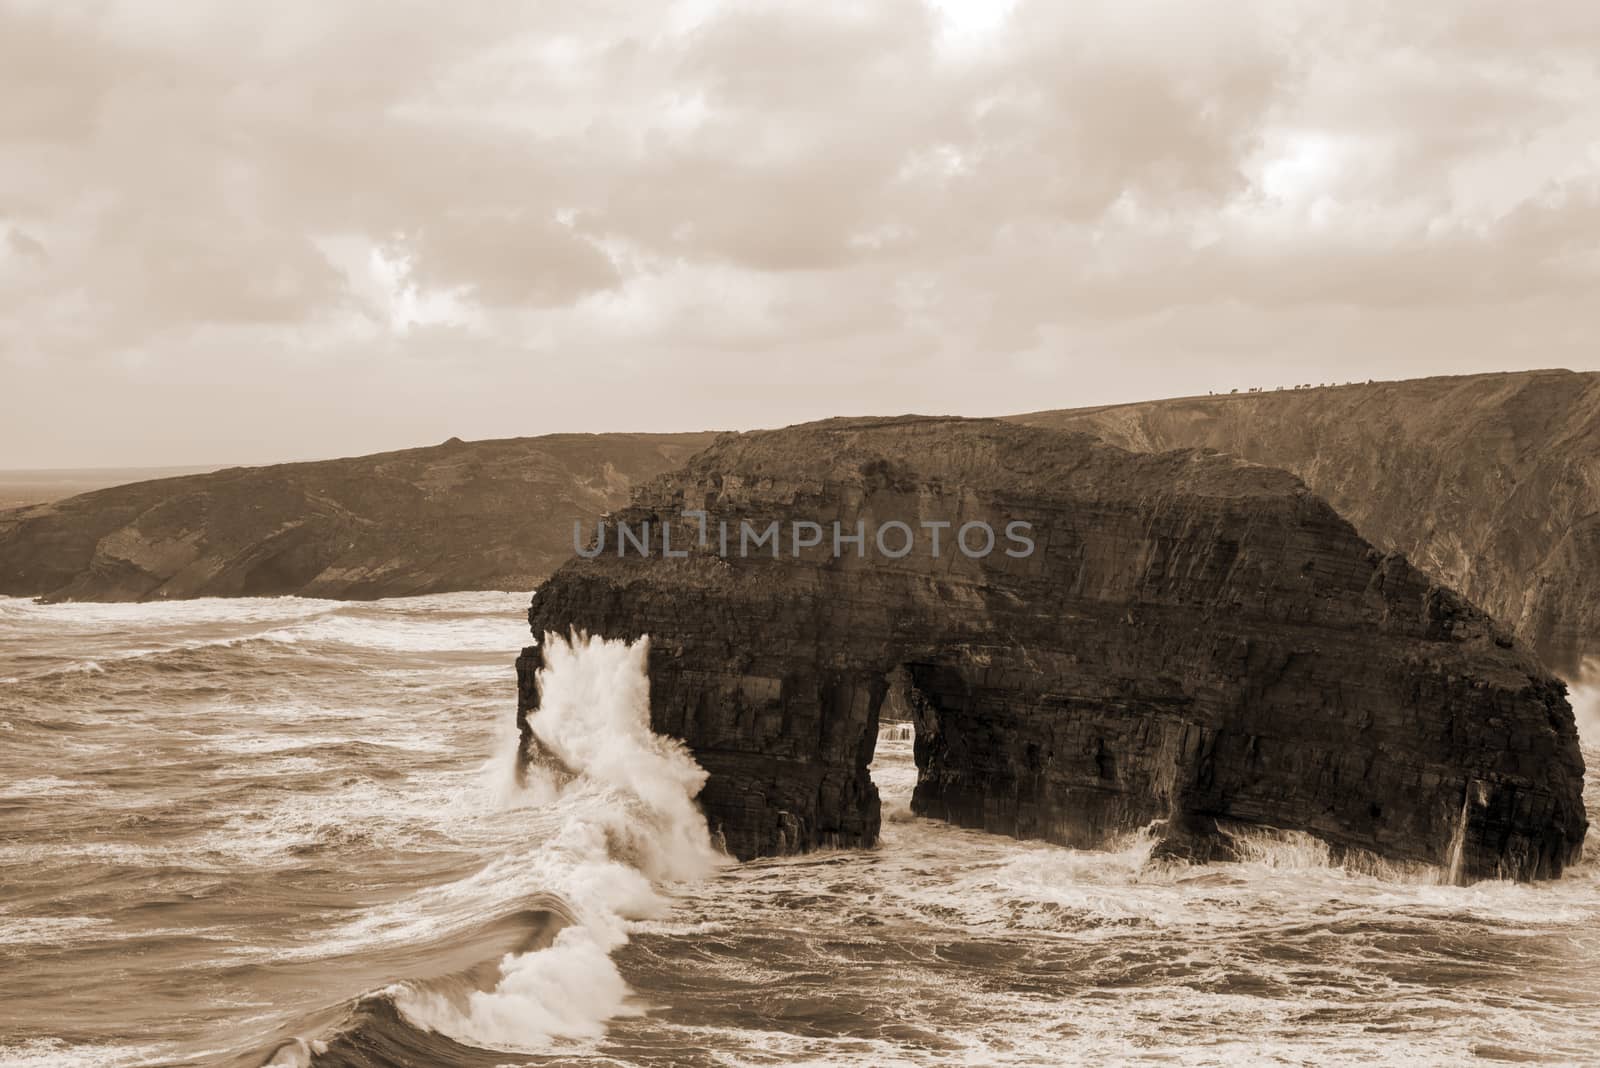 beautiful view of the virgin rocks with storm waves on the wild atlantic way